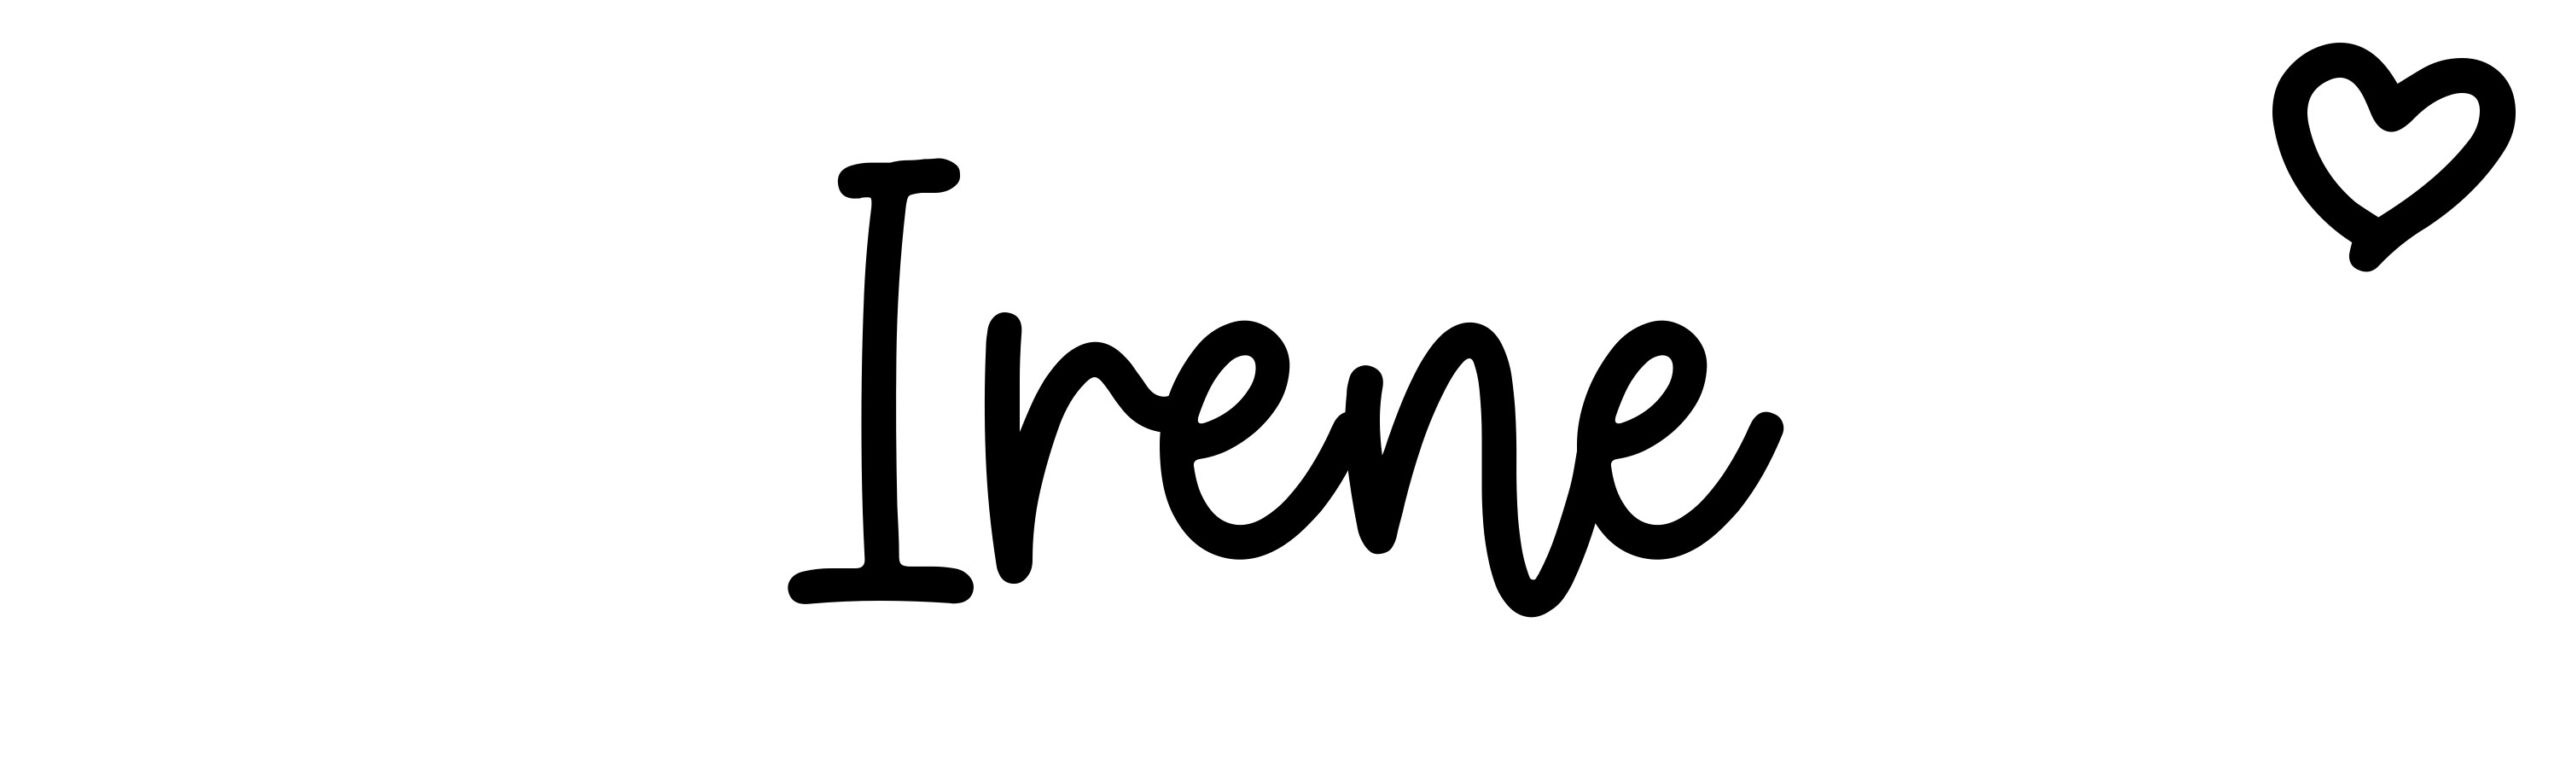 Irene - Name meaning, origin, variations and more